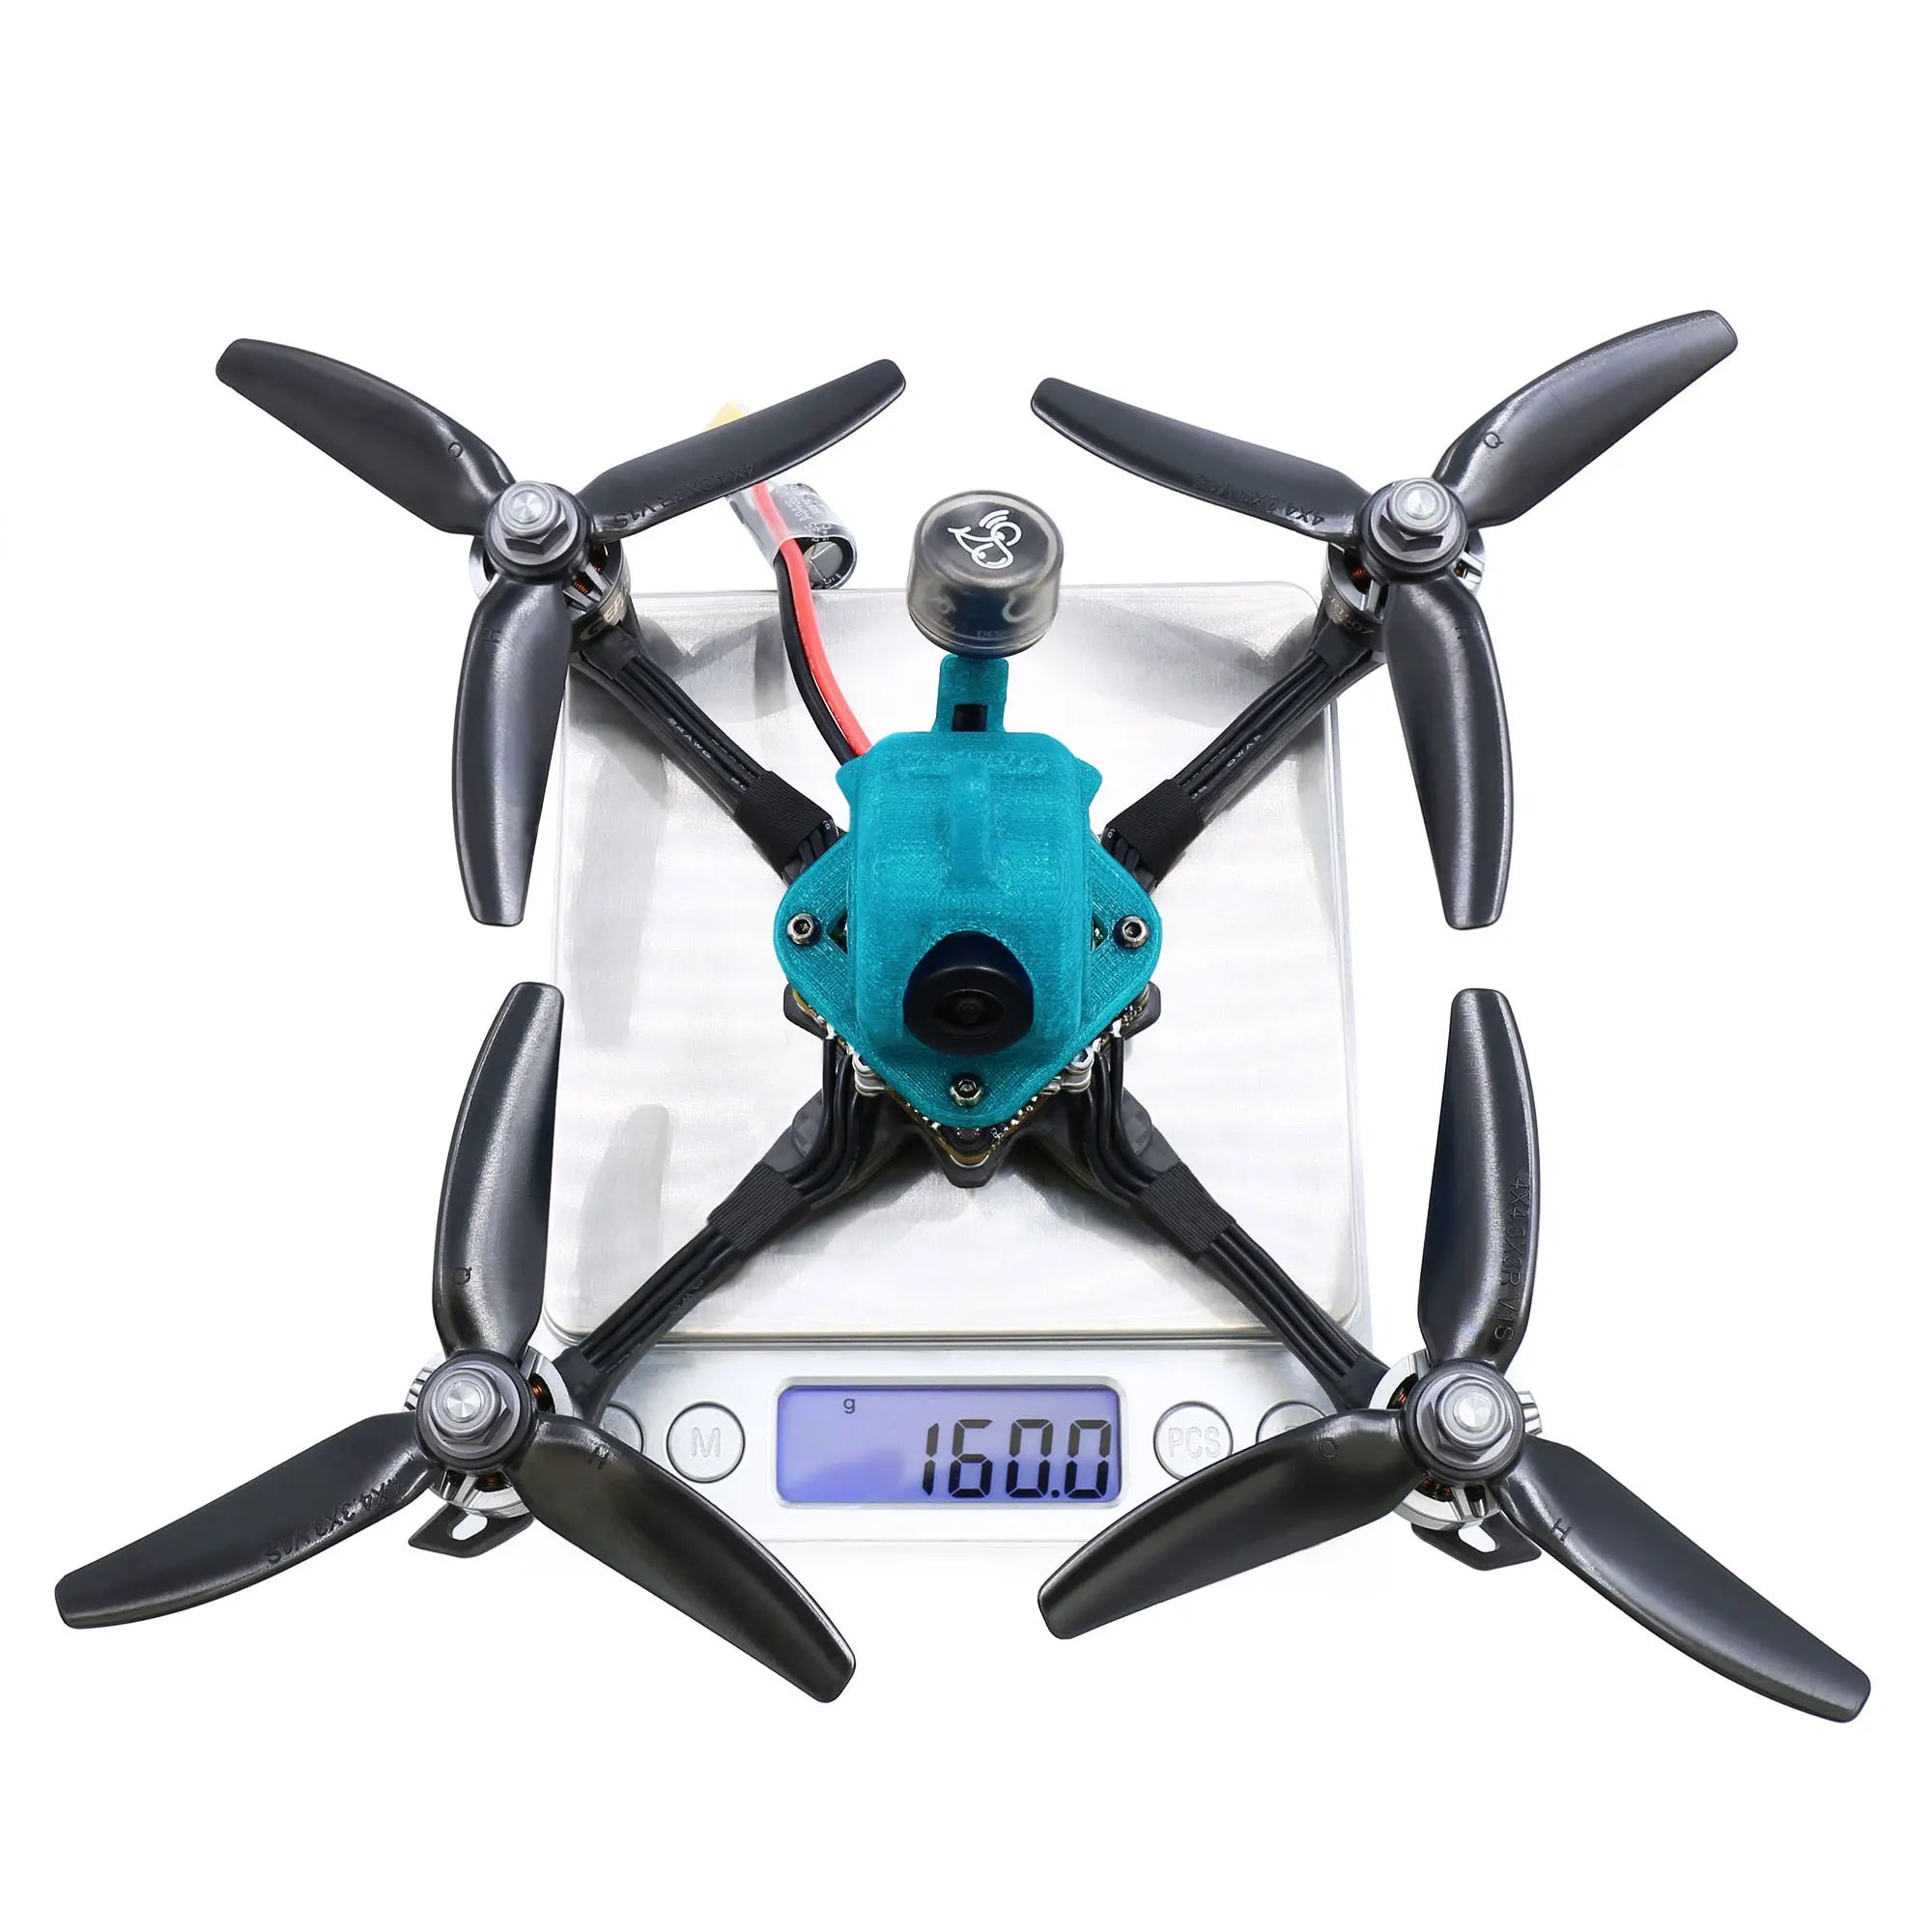 GEPRC Dolphin FPV Drone, the Dolphin had been redesigned through professional assembled and debugged by GEPRC team